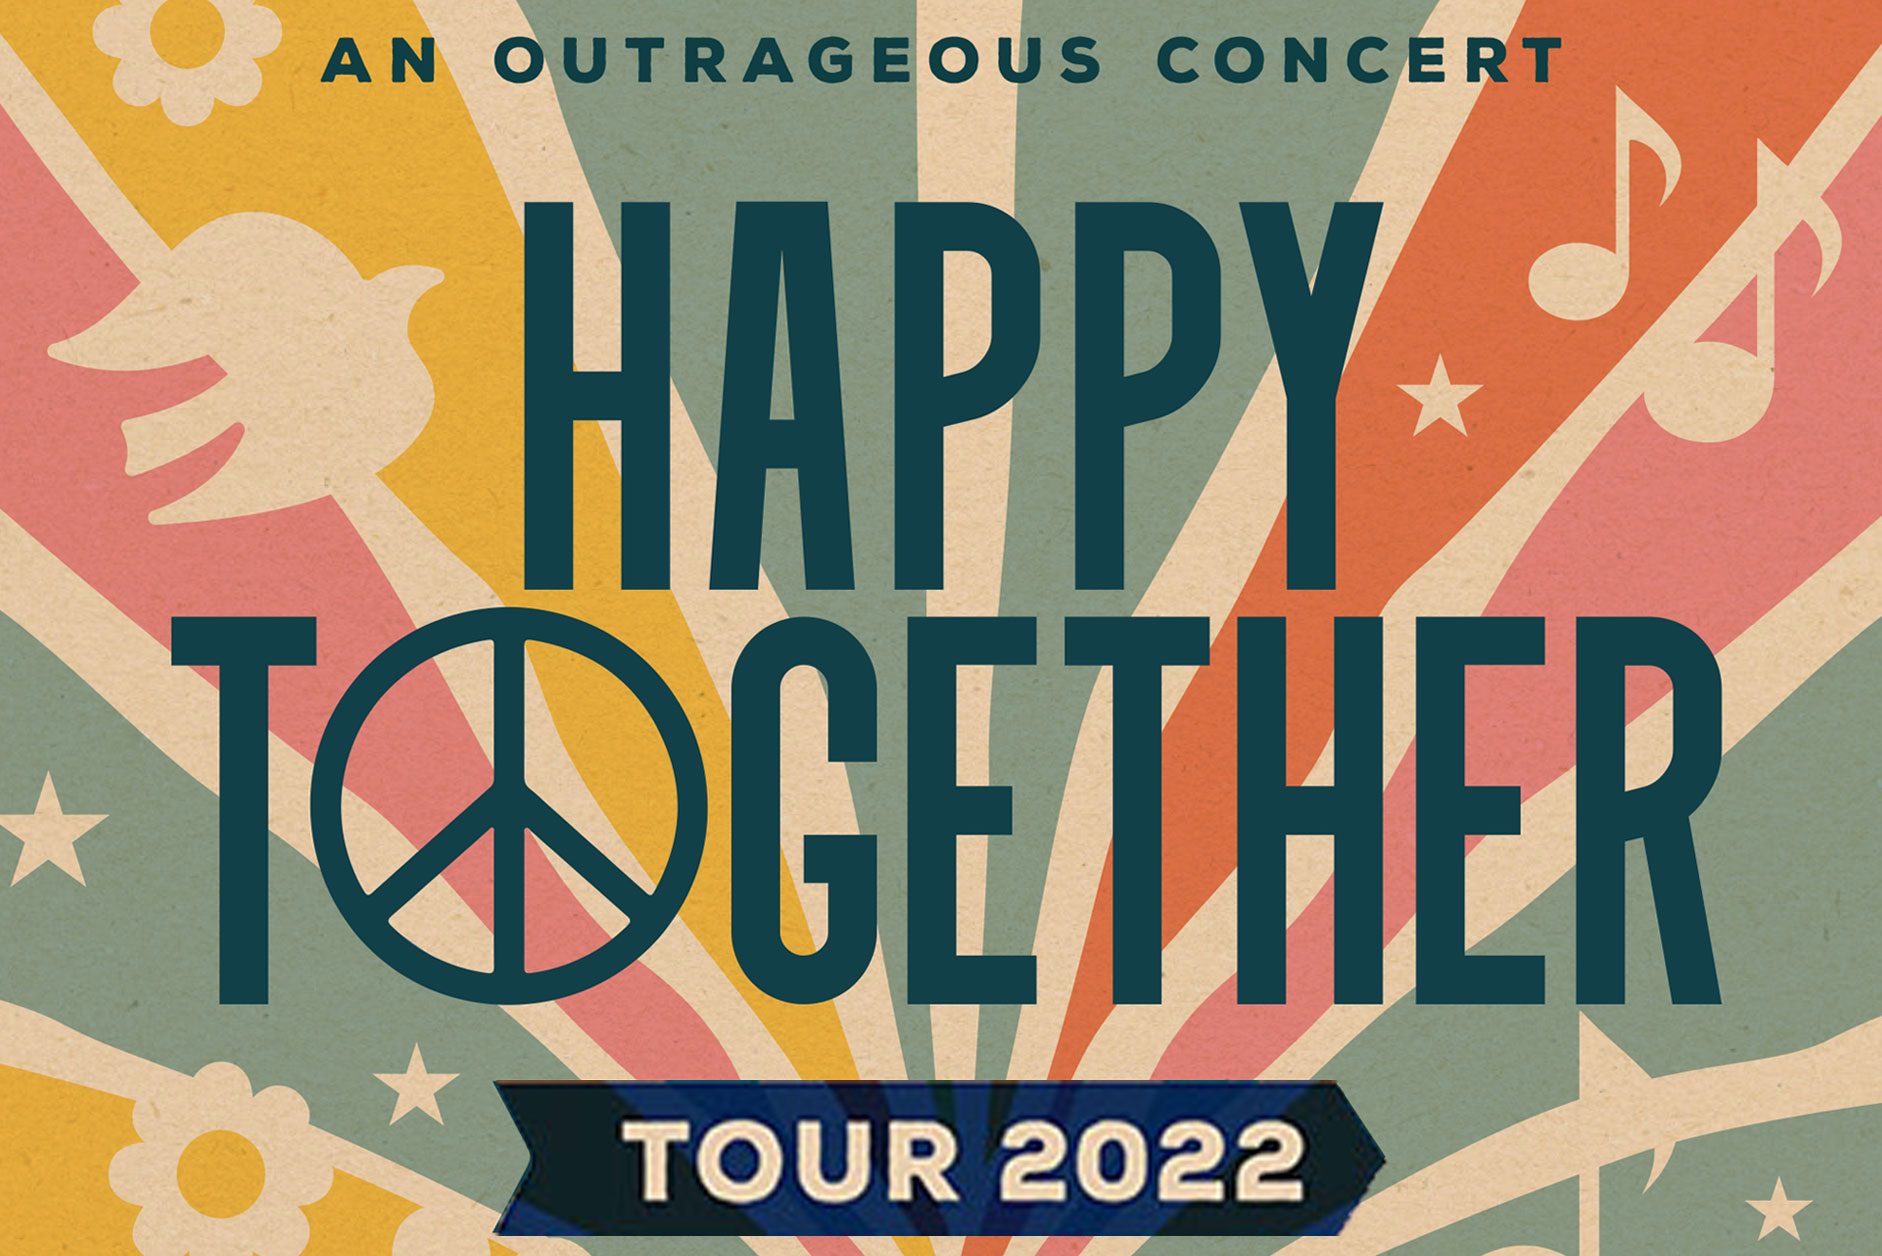 Happy Together Tour